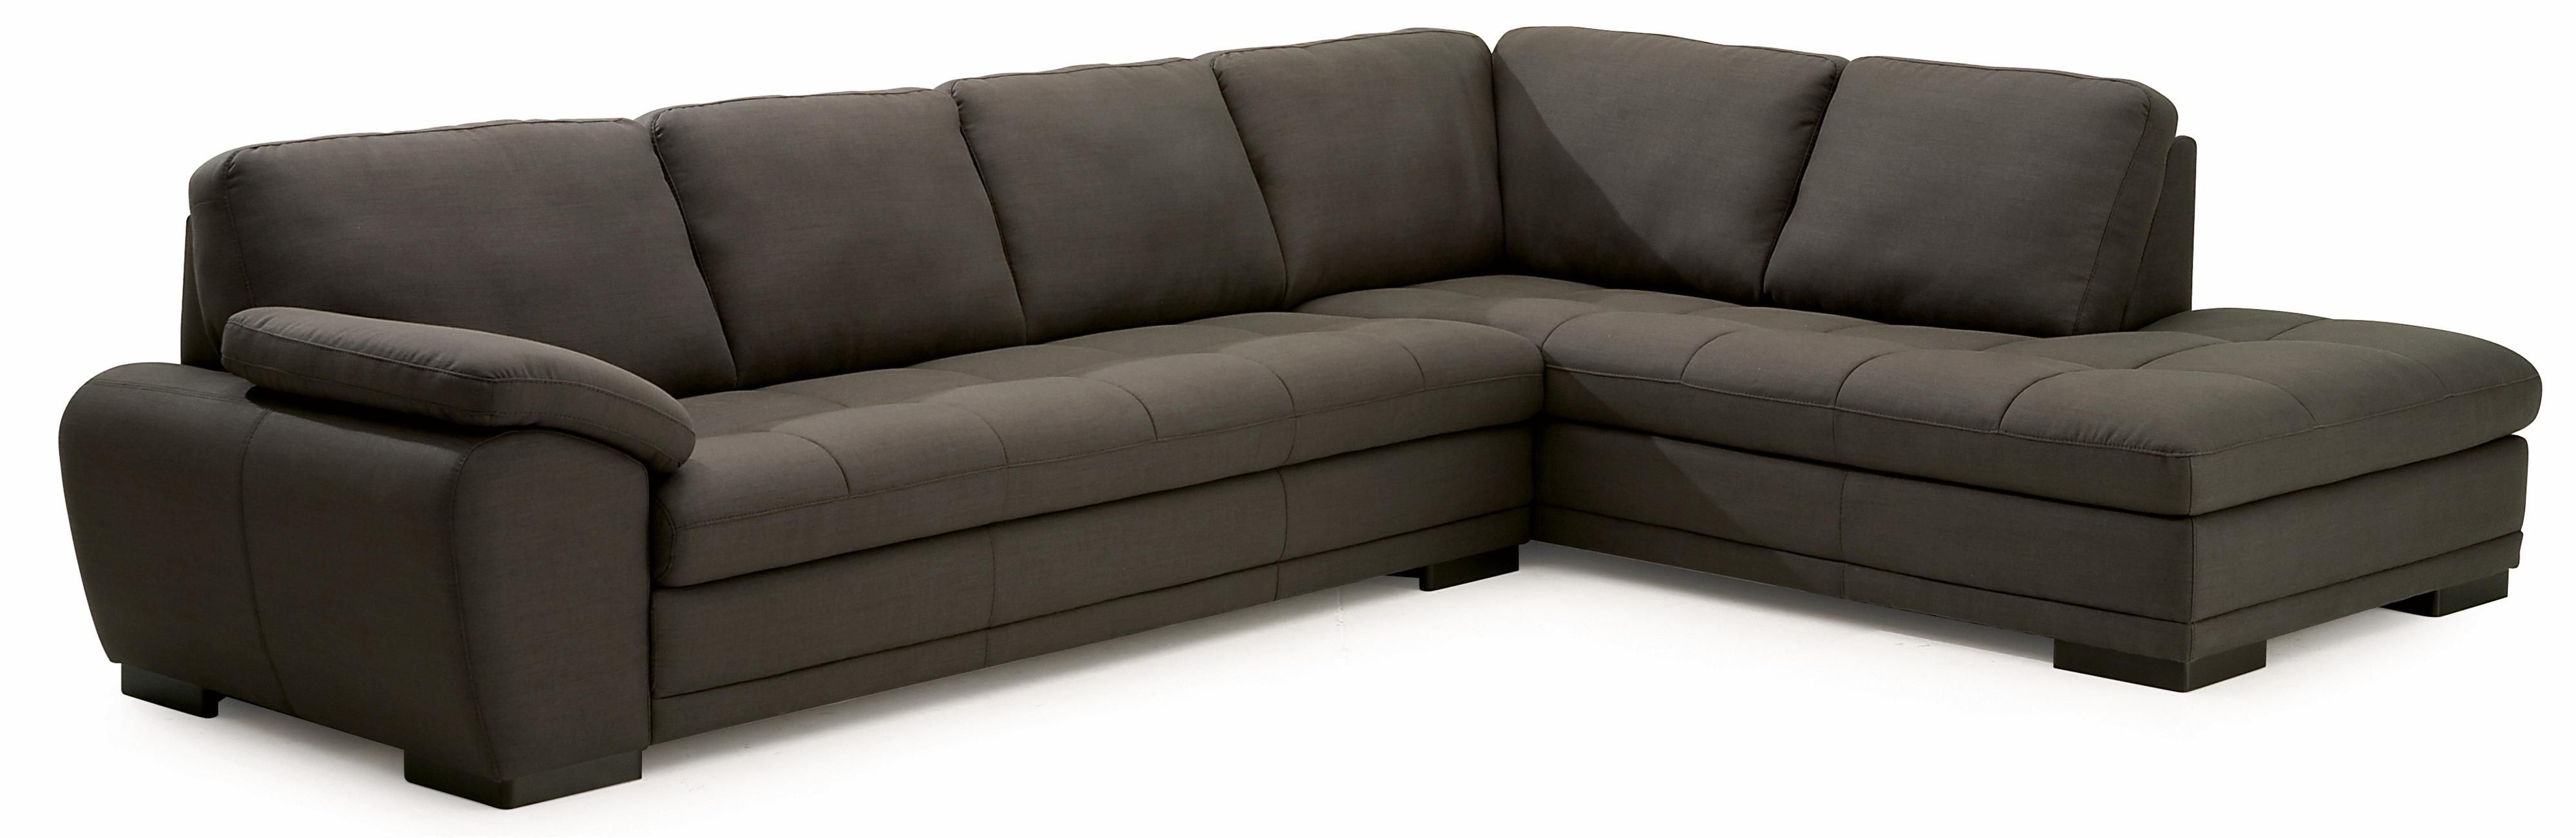 Palliser Miami Contemporary 2 Piece Sectional Sofa With Right Facing Throughout Miami Sectional Sofas (Photo 1 of 10)